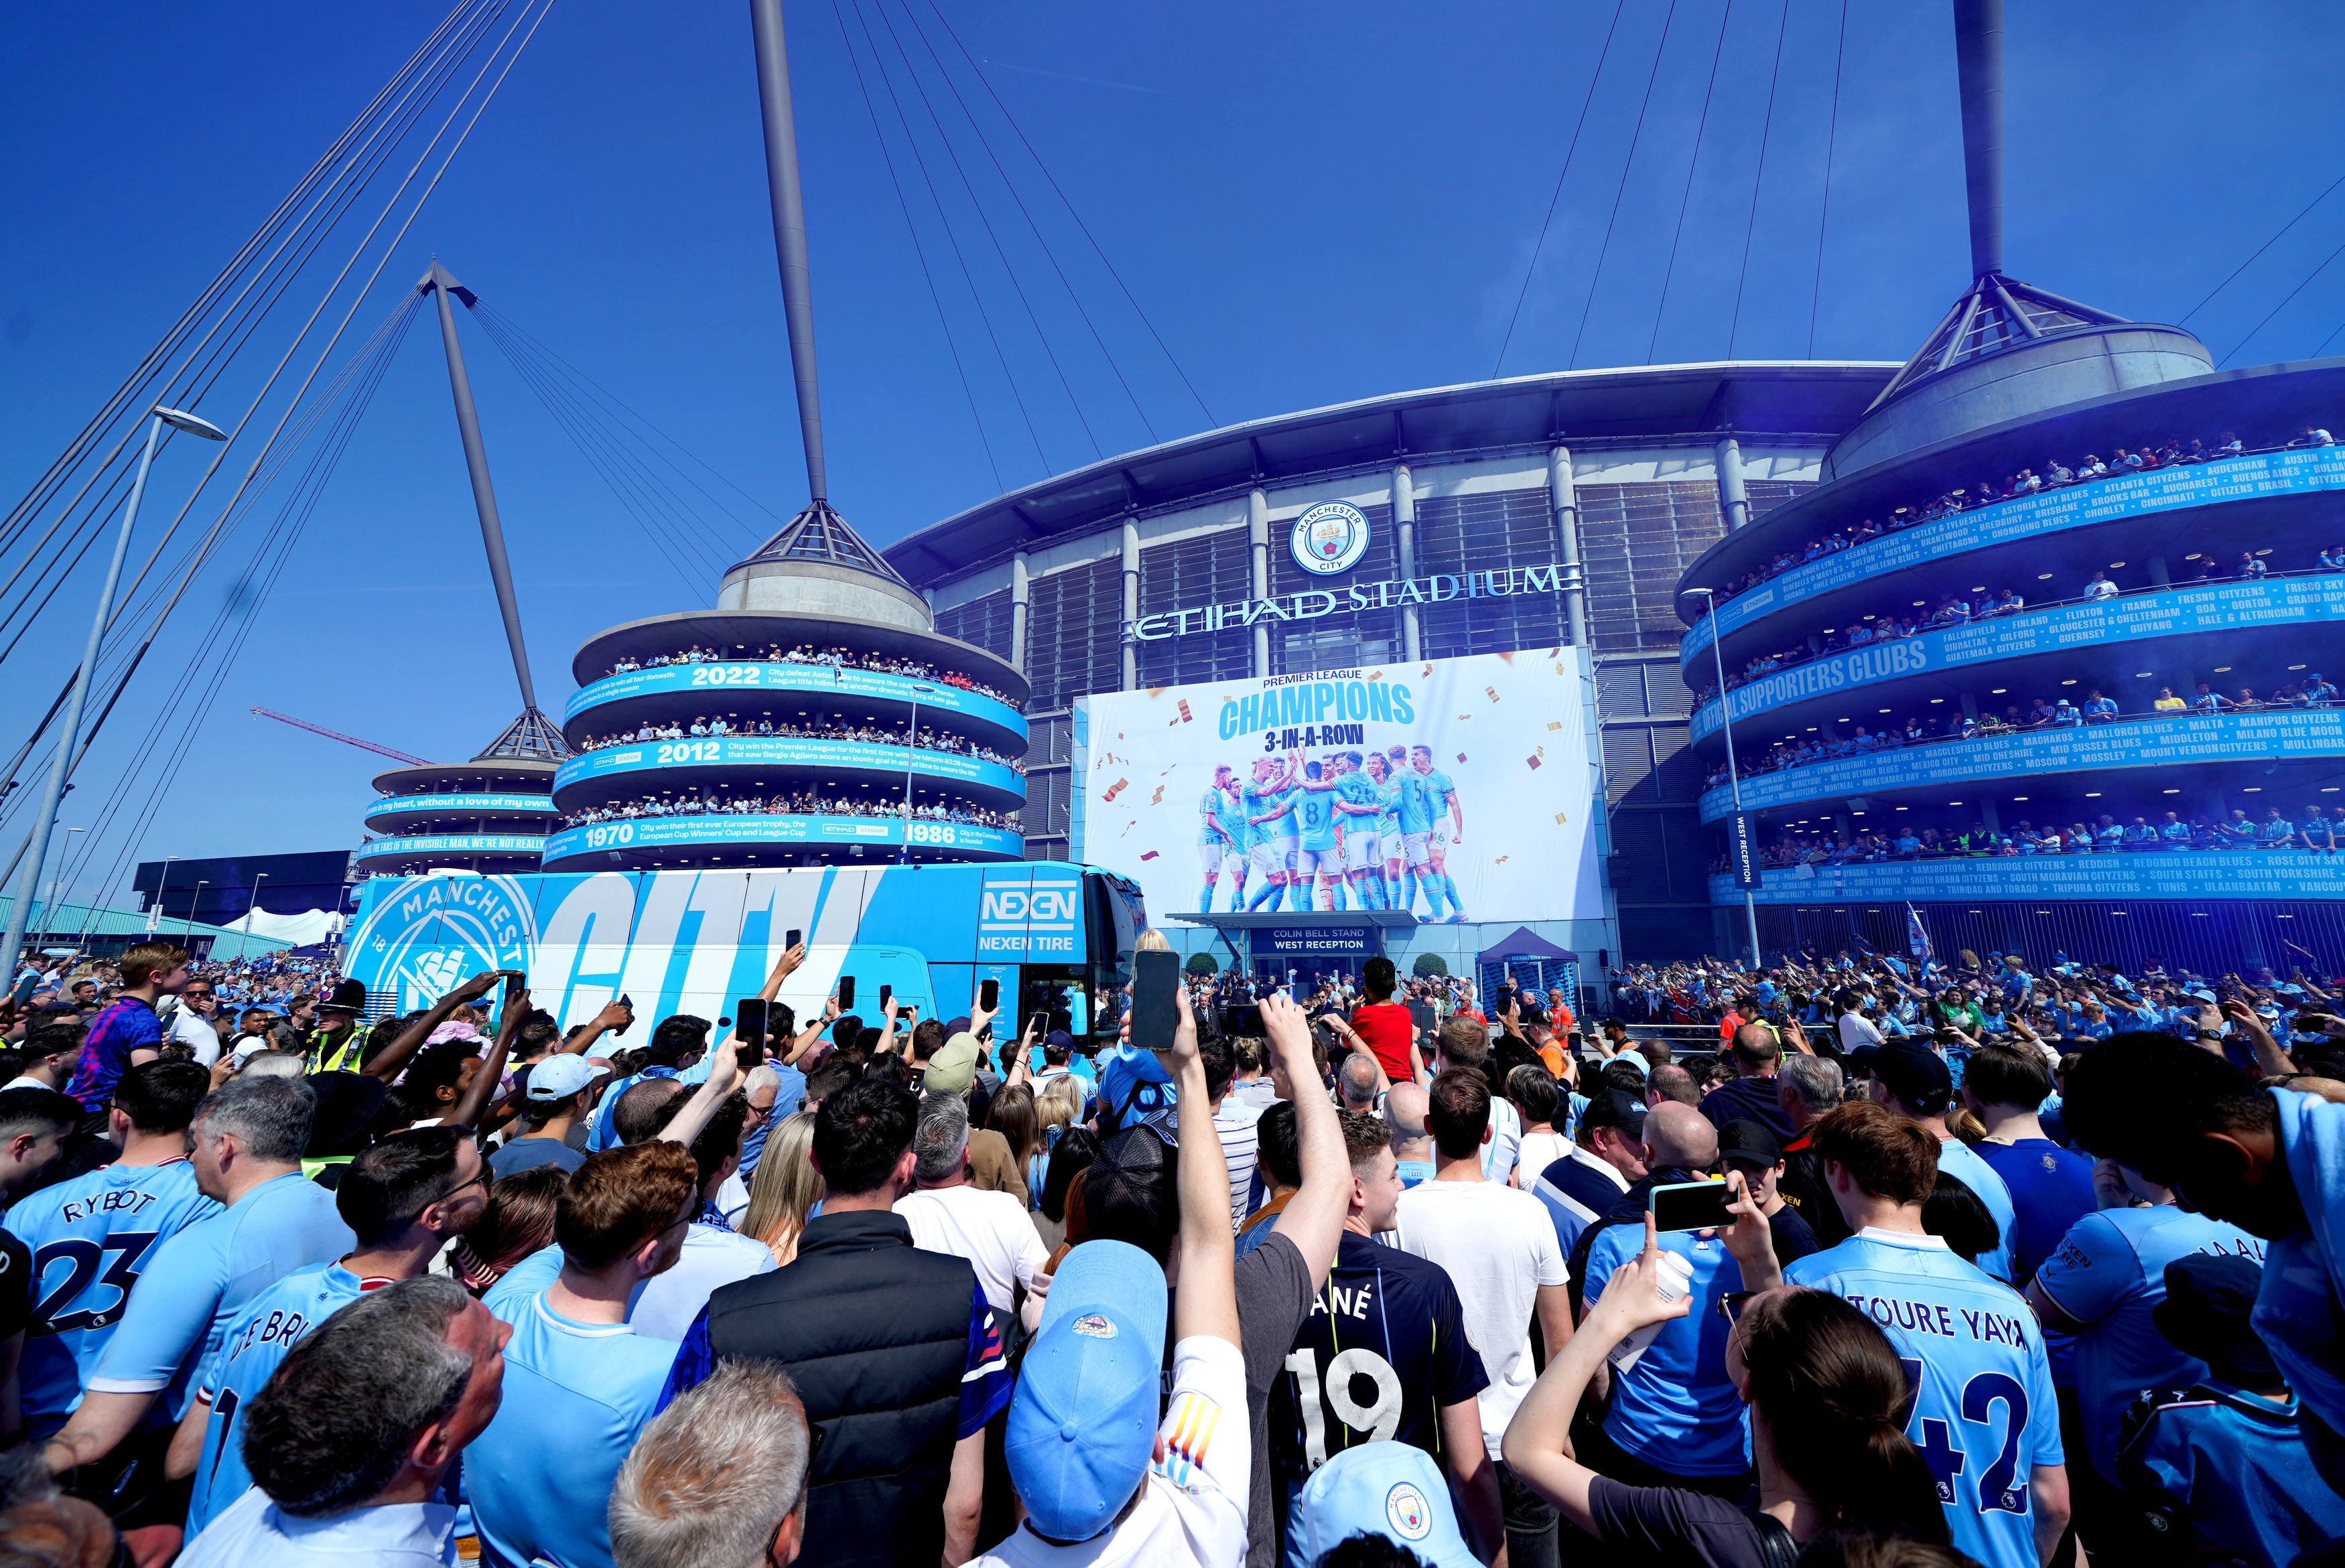 Manchester City fans outside the Etihad Stadium for their final home game of the season